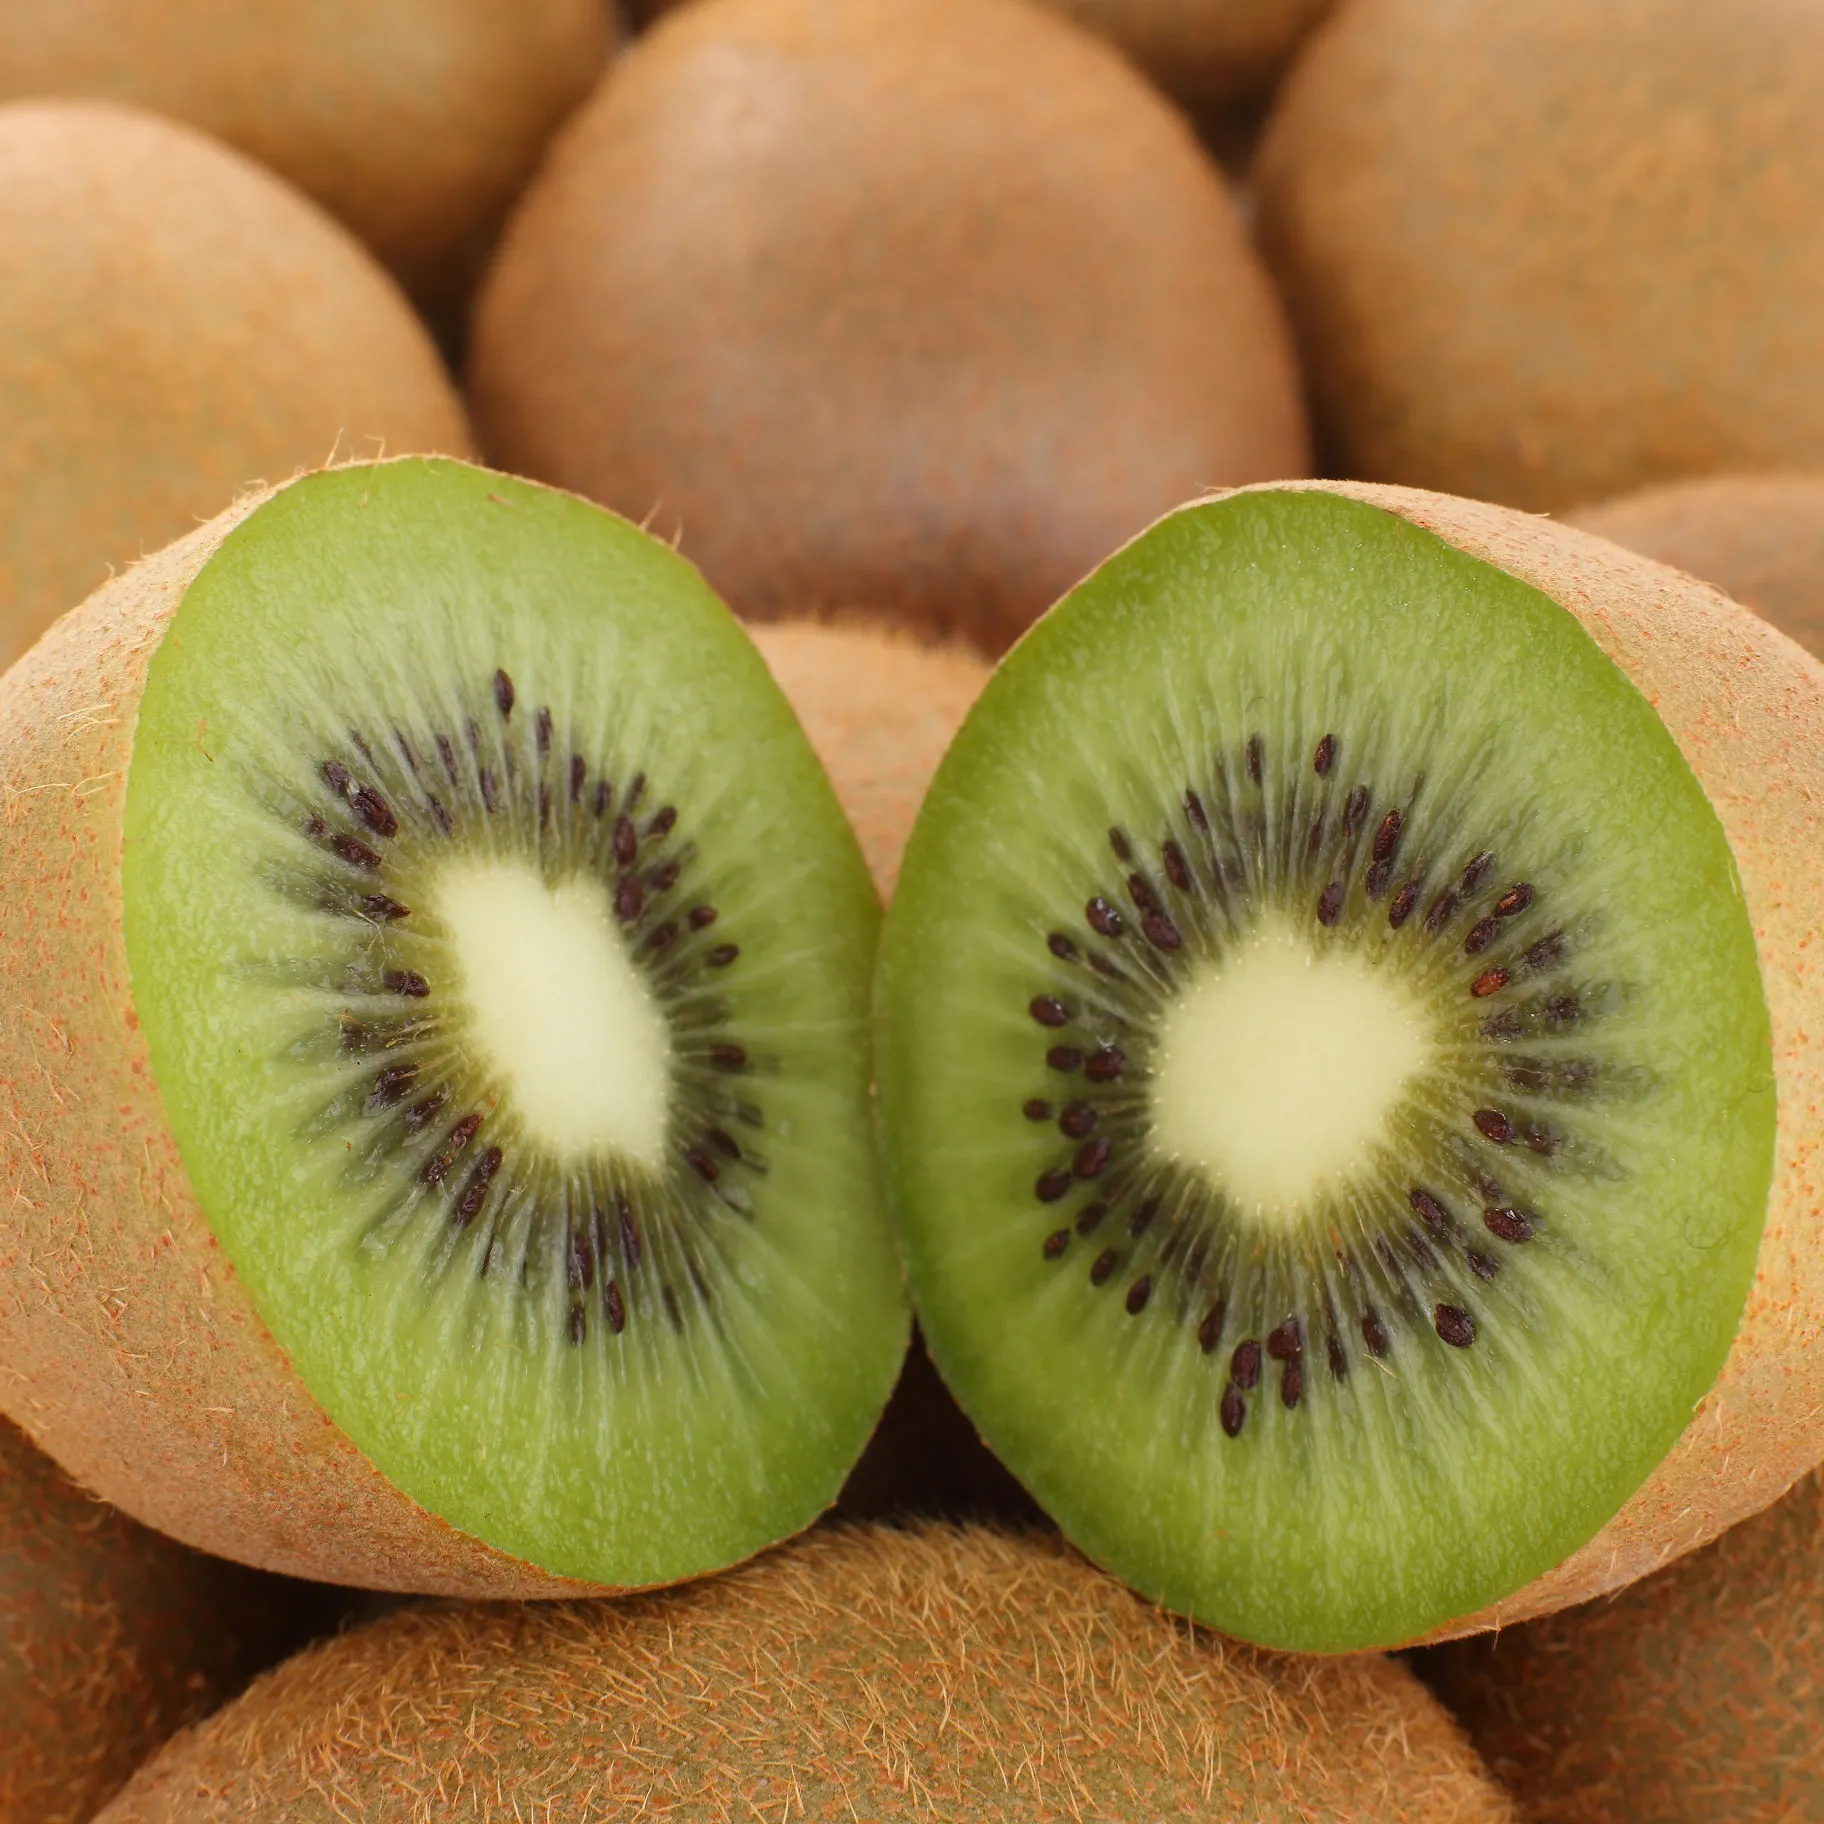 Buying the latest types of Golden kiwi from the most reliable brands in the world